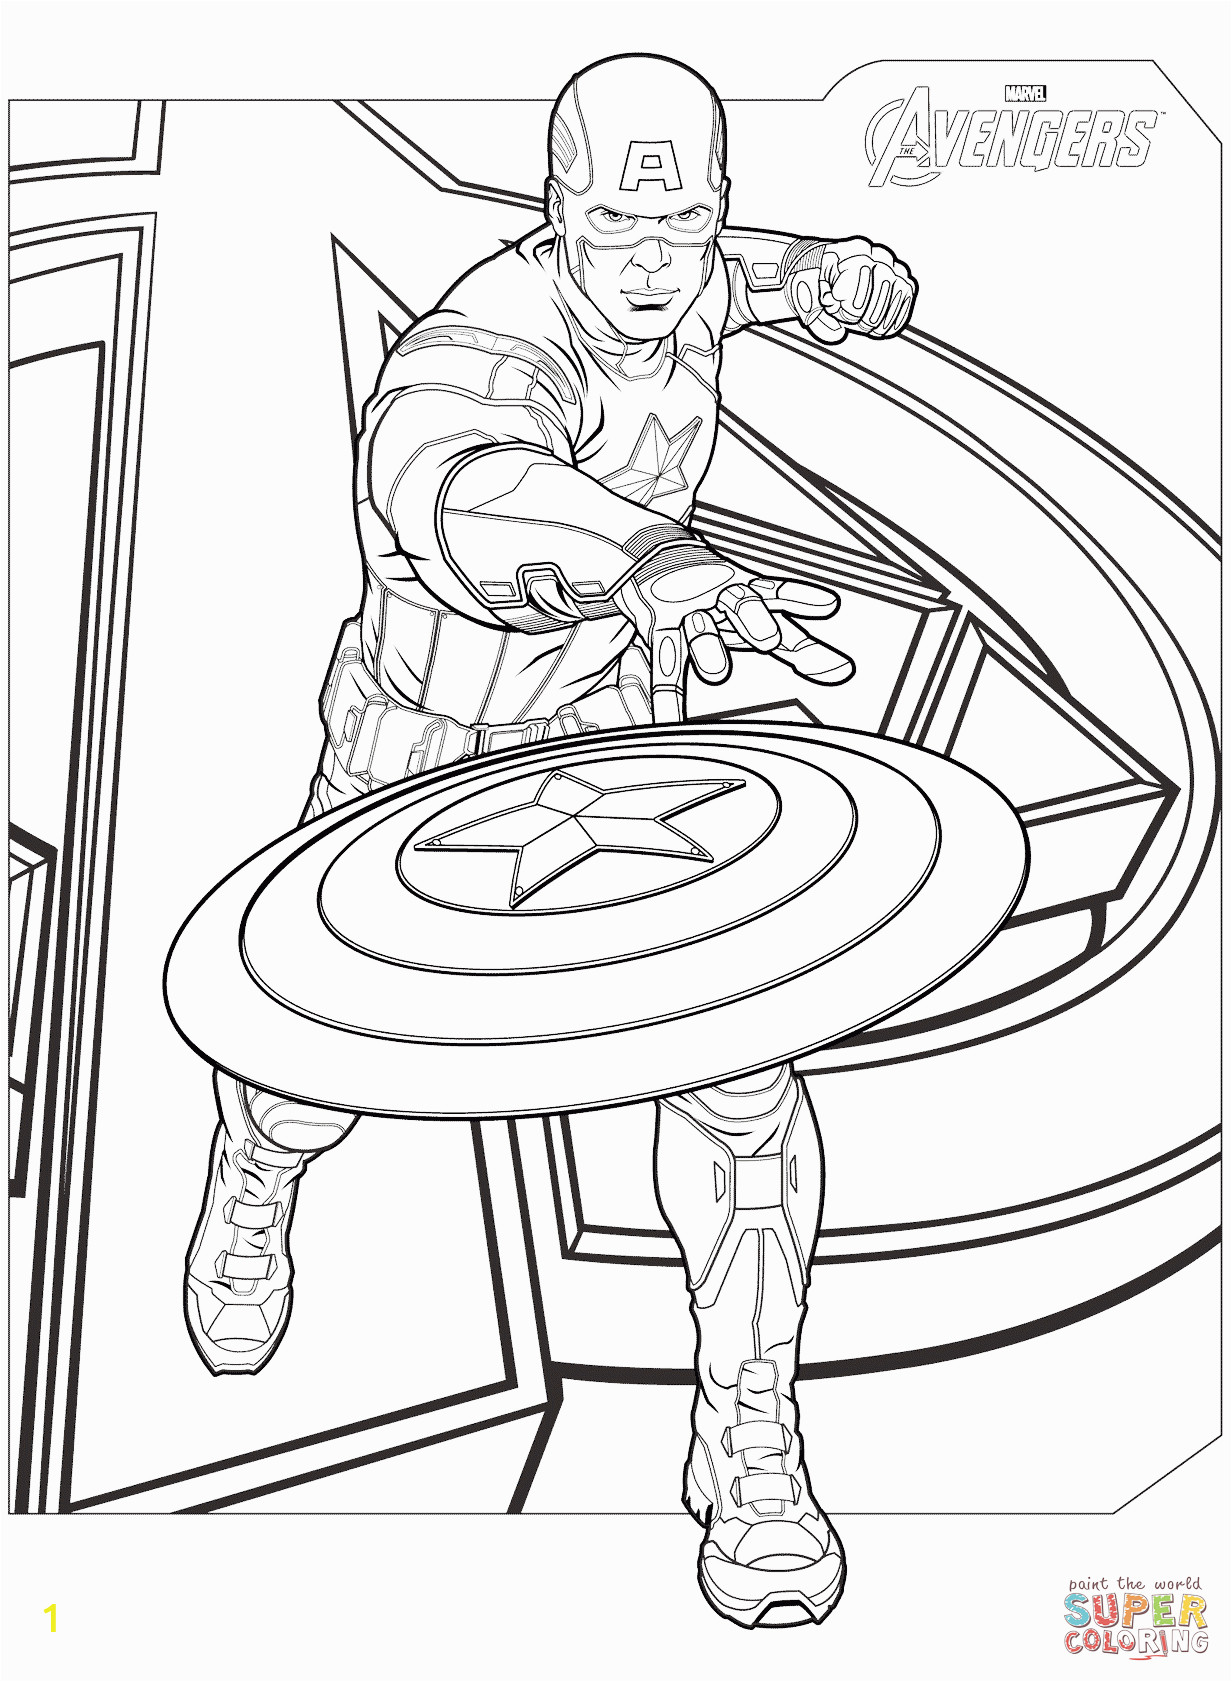 captain america coloring page avengers free printable pages marvel scarlet witch infinity war black panther thor machine movie colouring pictures ant man and the wasp